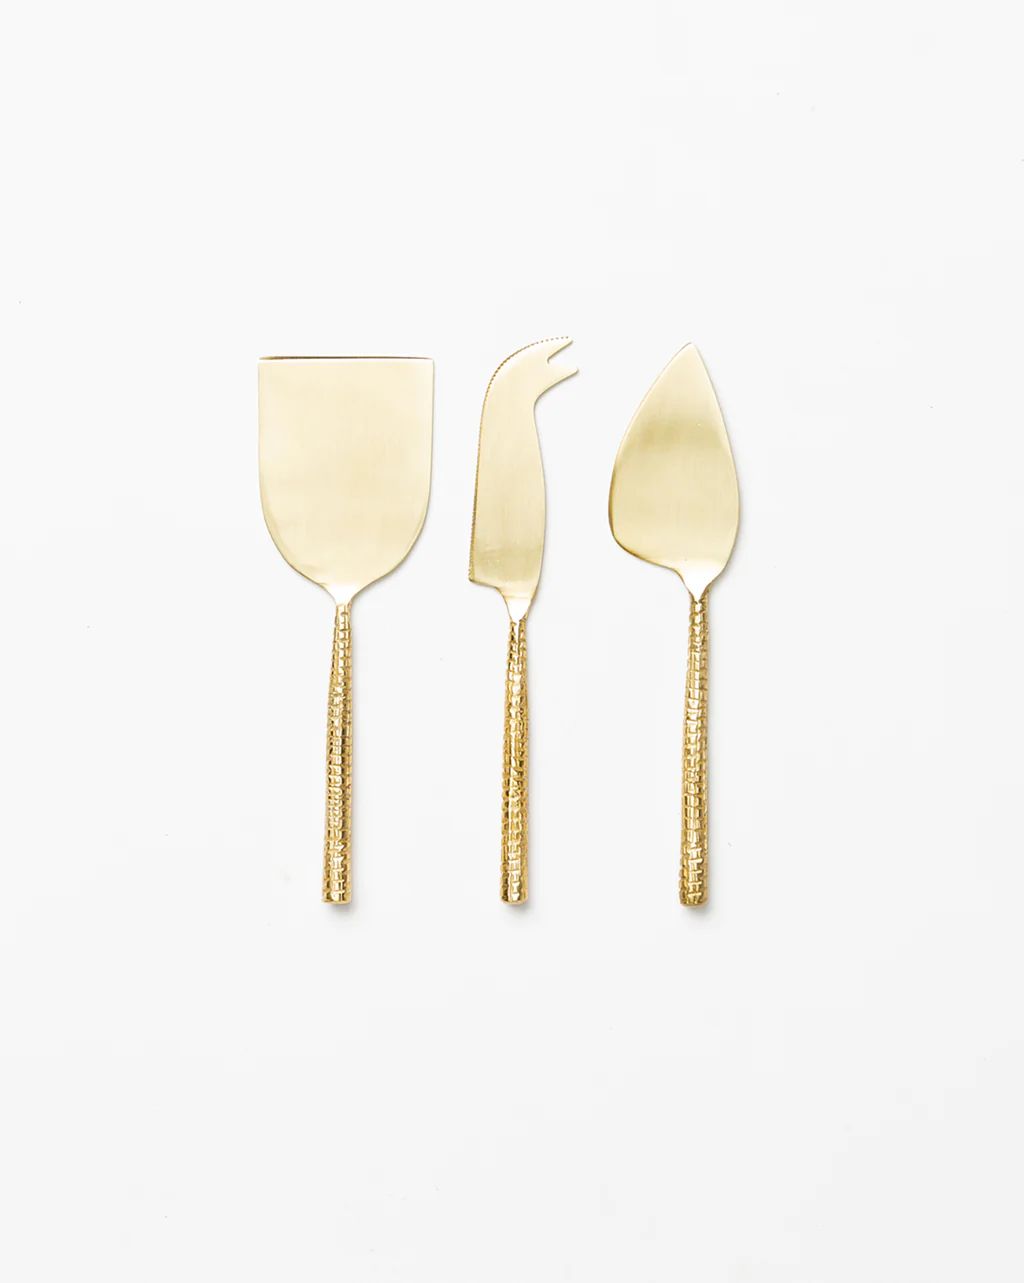 Gold Hammered Cheese Knives (Set of 3) | McGee & Co.